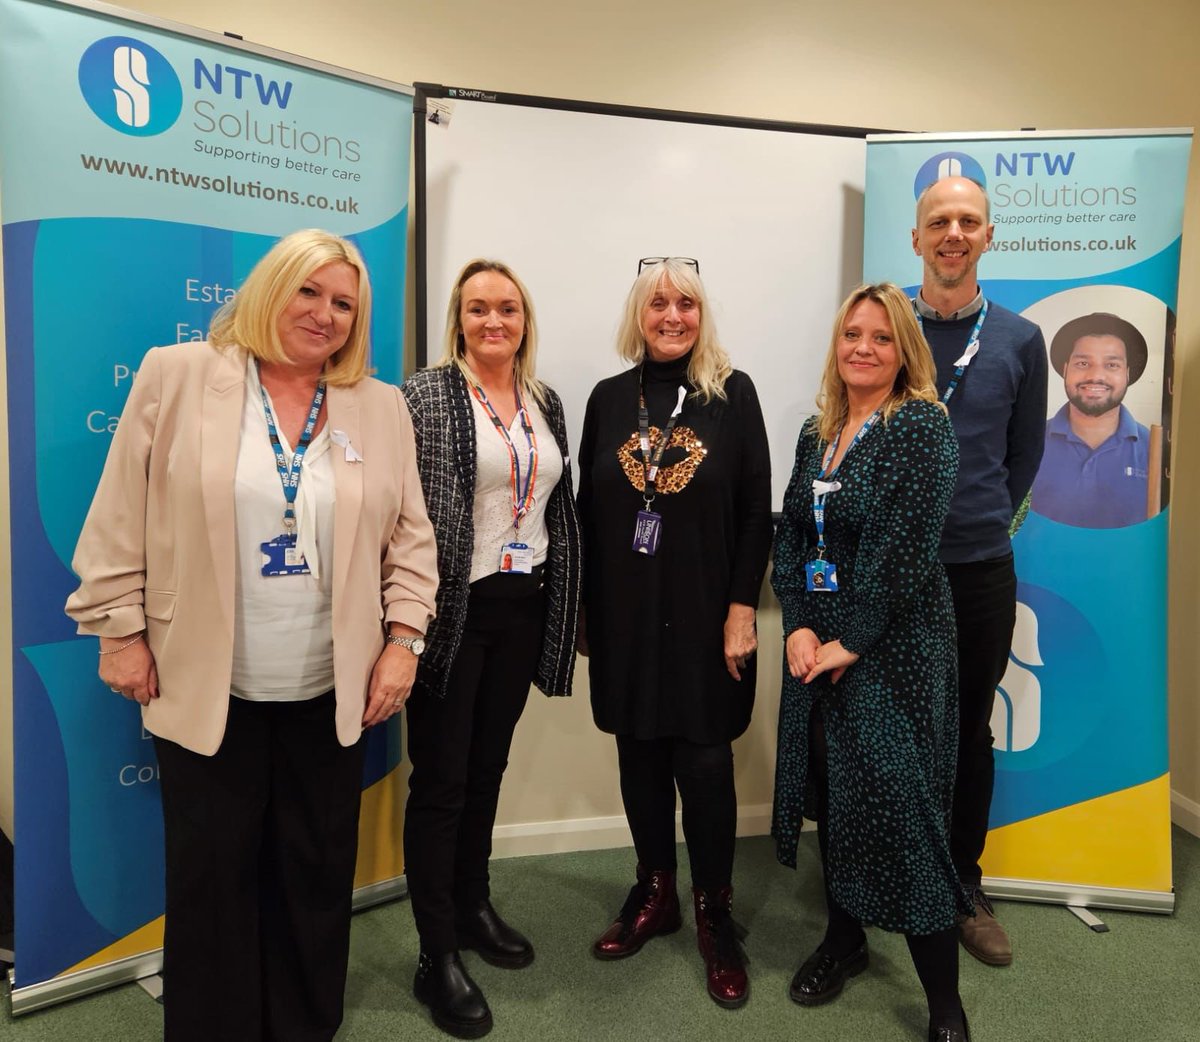 4th Day of #16DaysActivism  We engaged with #NTWSolutions the subco has been forward thinking in recognising  that Domestic Abuse is a Workplace Issue & today in partnership with @NCNTW_Unison pledge to #ChangeTheStory @VBullerwell @WhiteRibbon_UK @CNTW_SafetyTeam